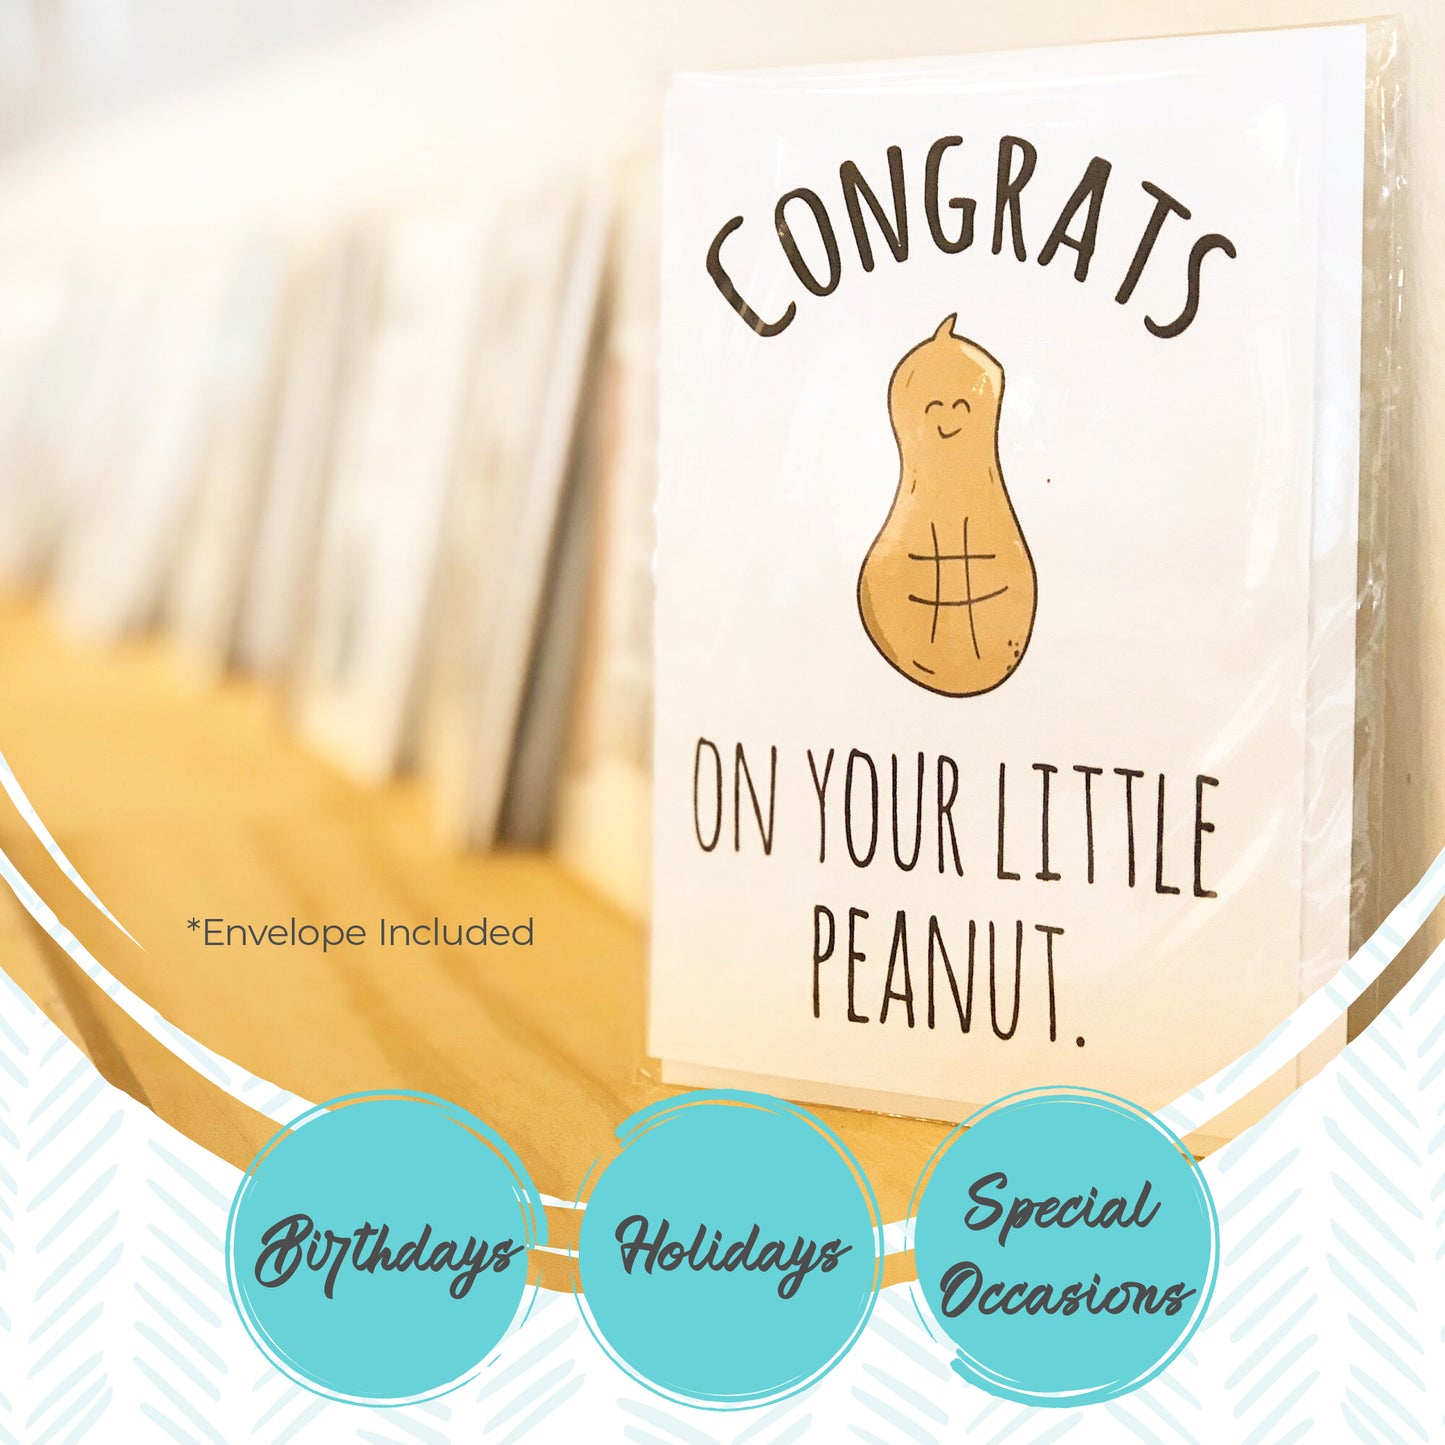 SALE - Congrats On Your Little Peanut  - Greeting Card